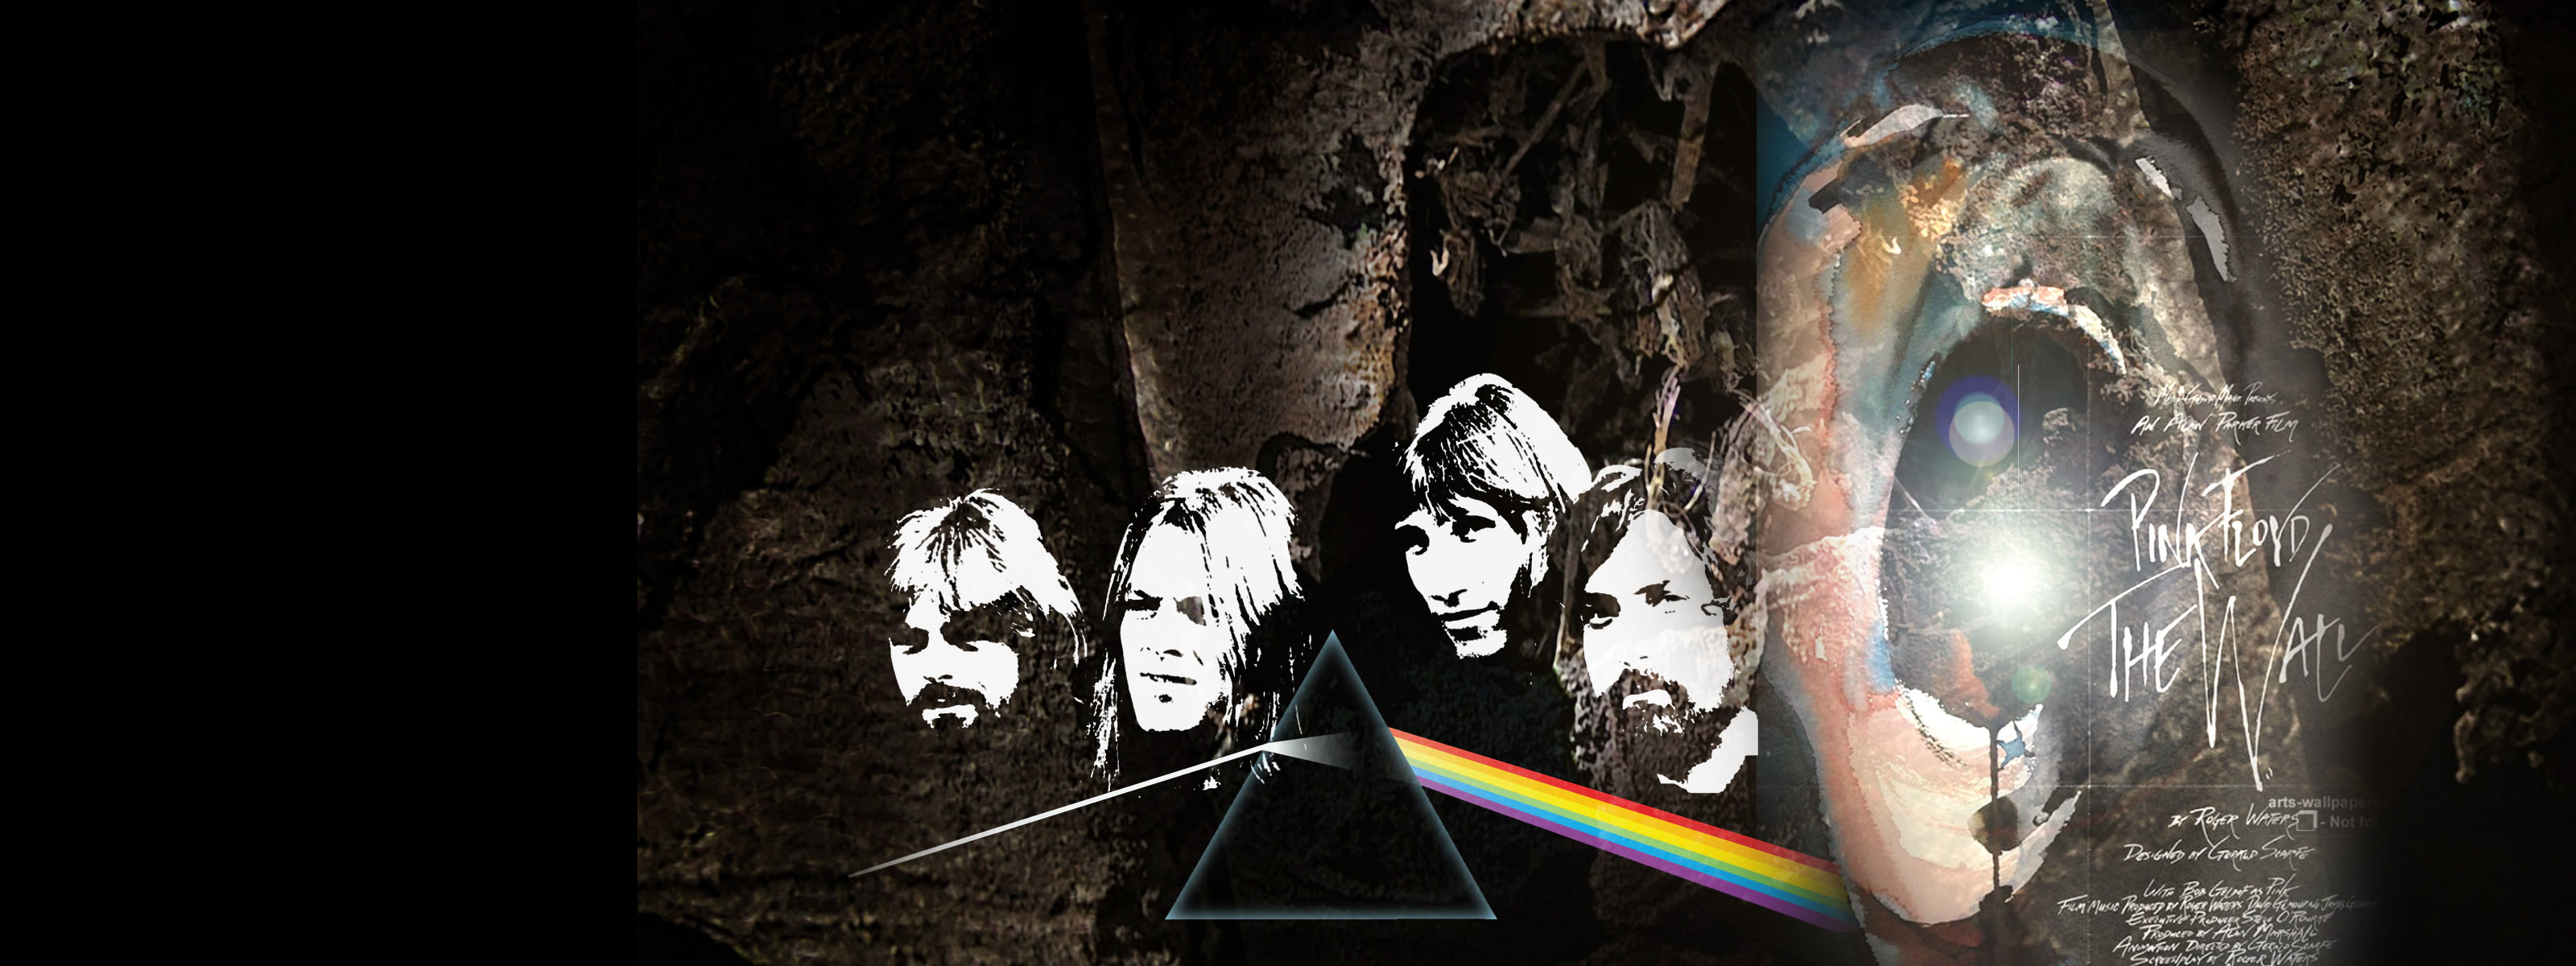 To Download The Image To Your Computer Right-click - High Resolution Pink Floyd Wallpaper Hd - HD Wallpaper 